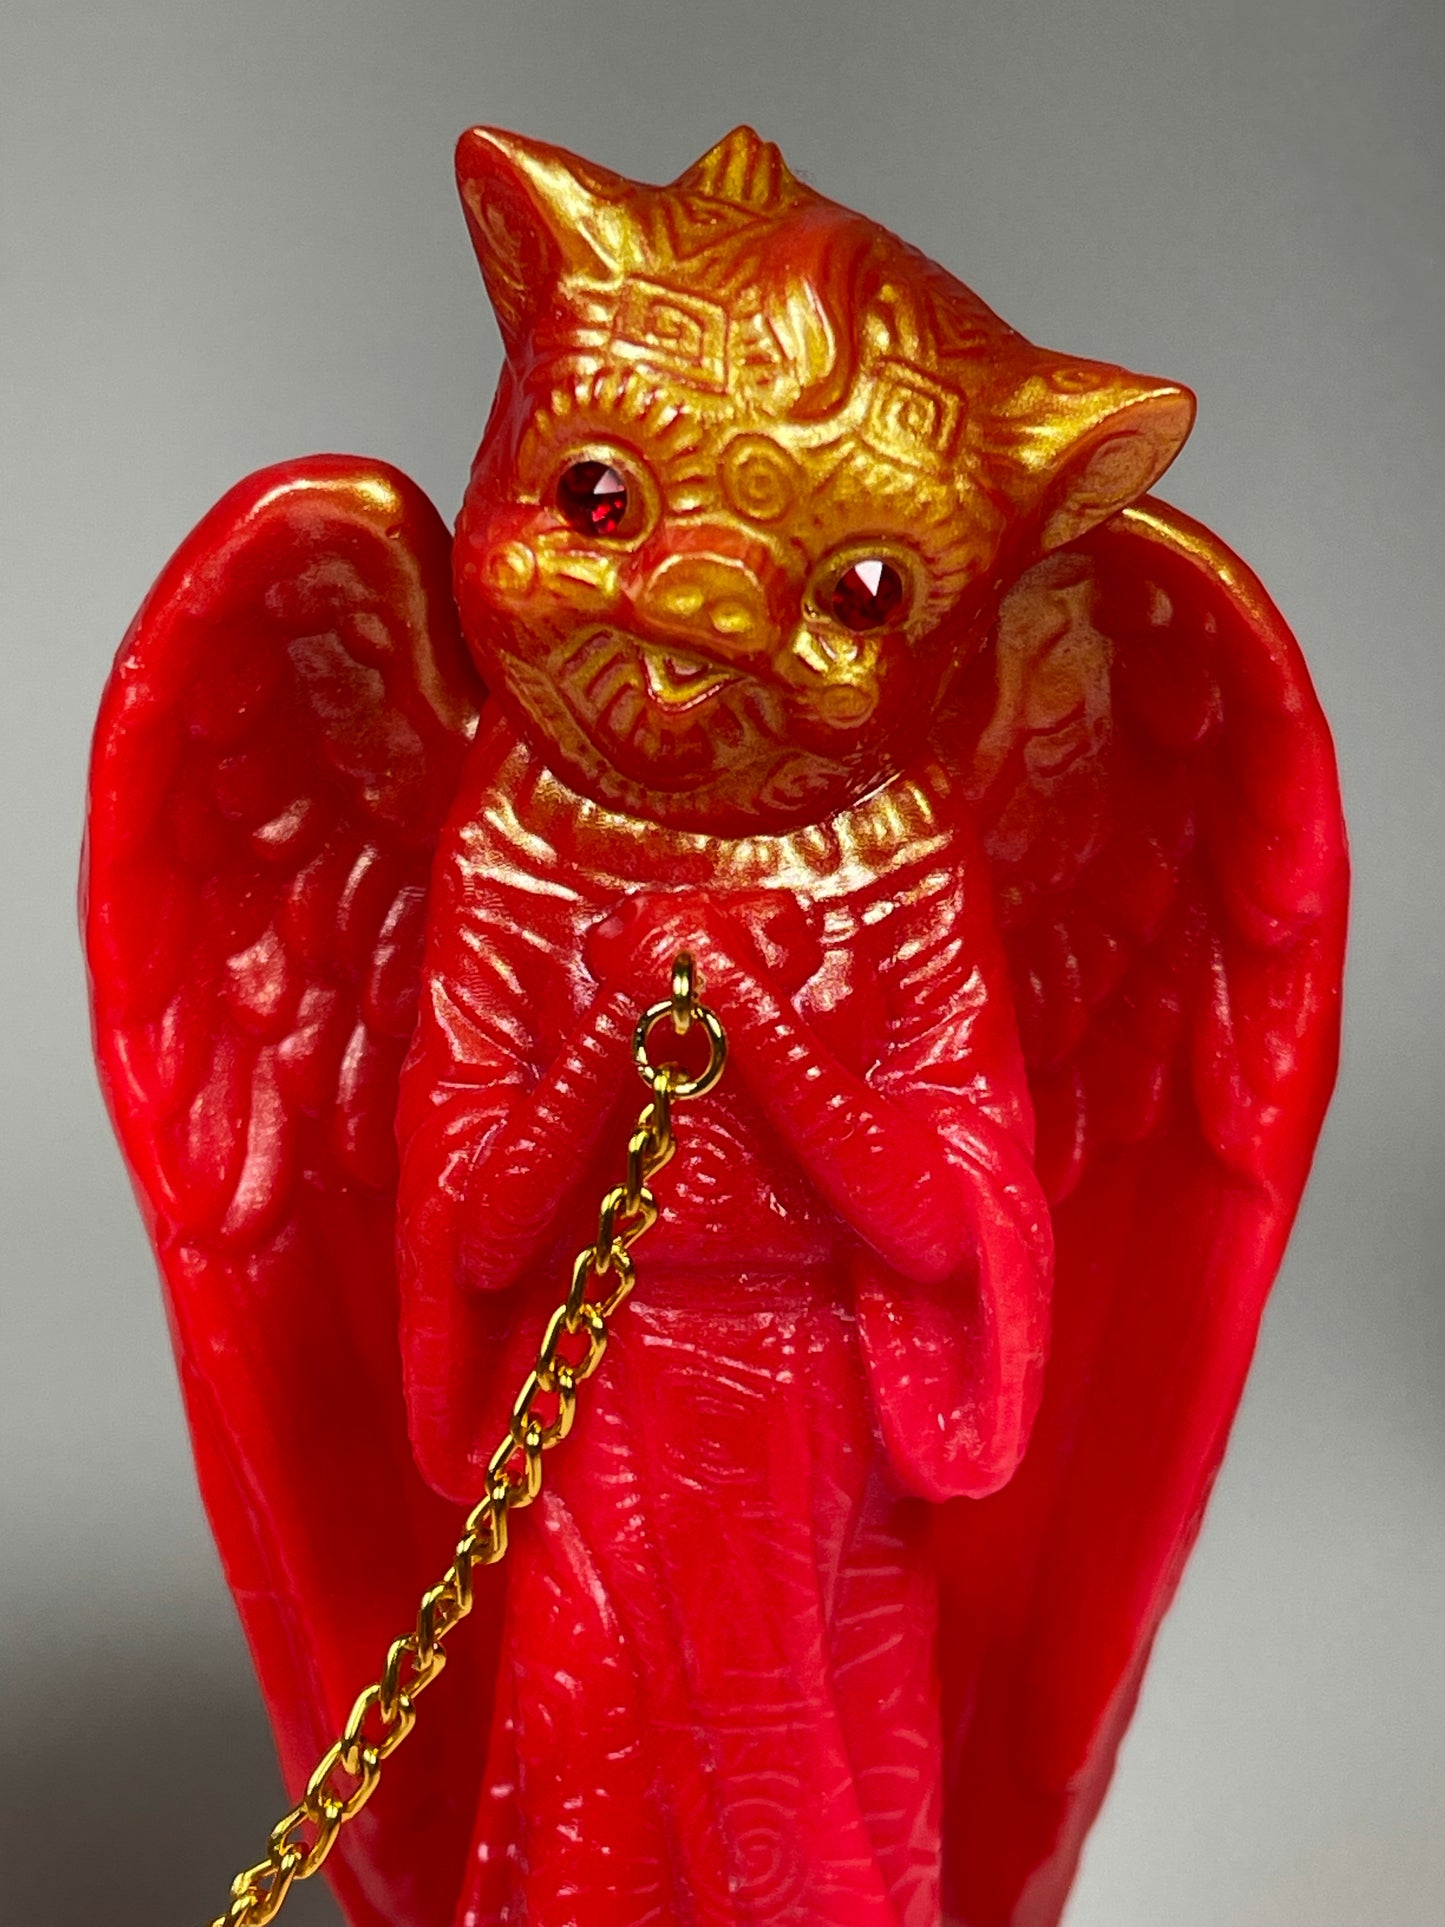 Angel Pig: Tickled by Hell Flame